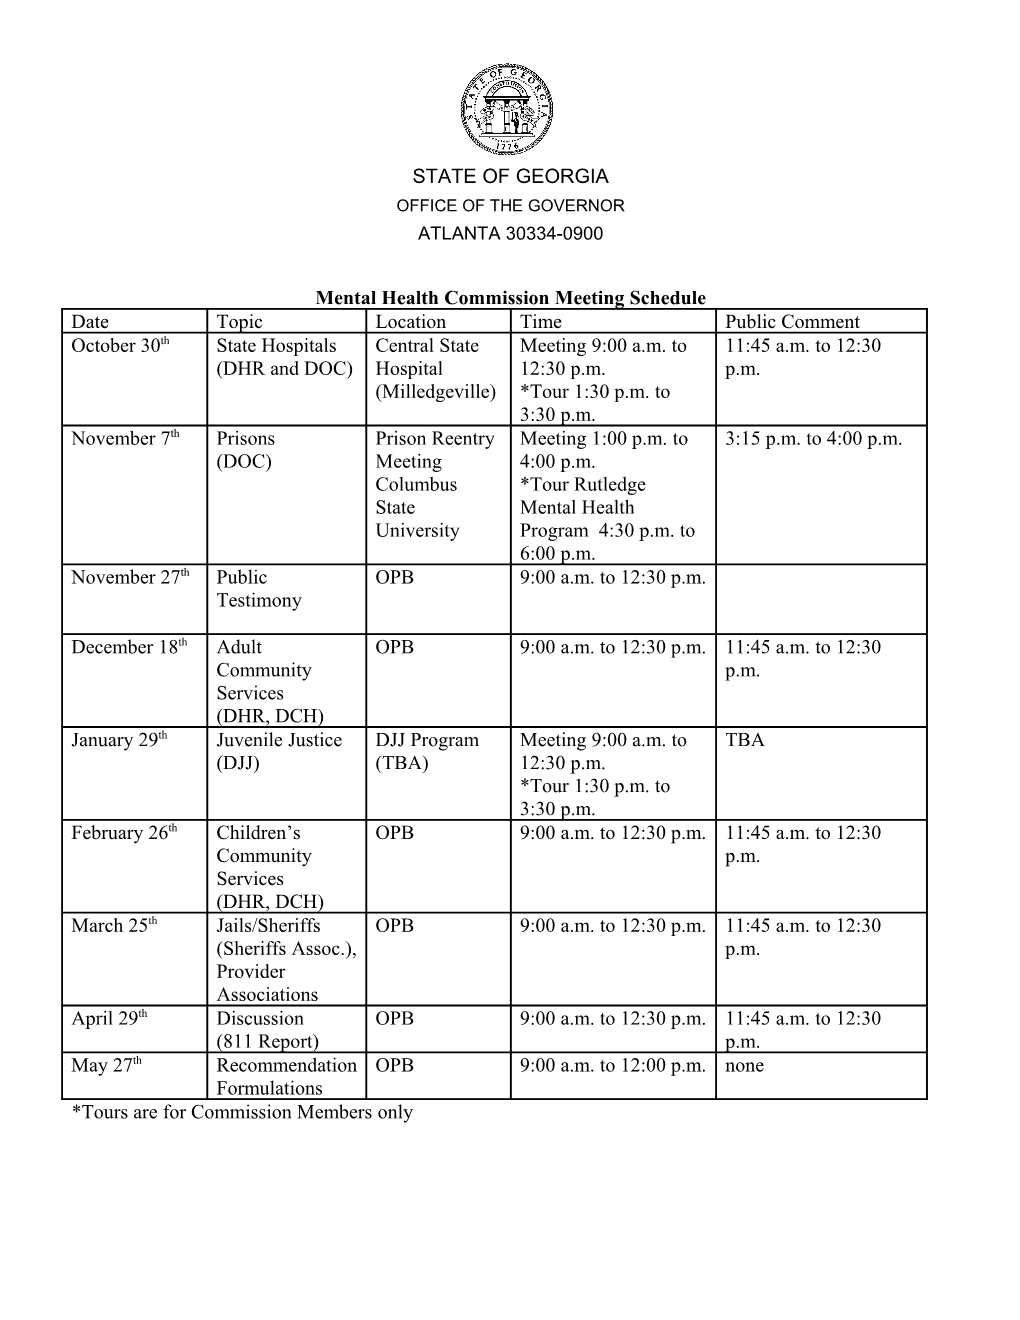 Mental Health Commission Meeting Schedule